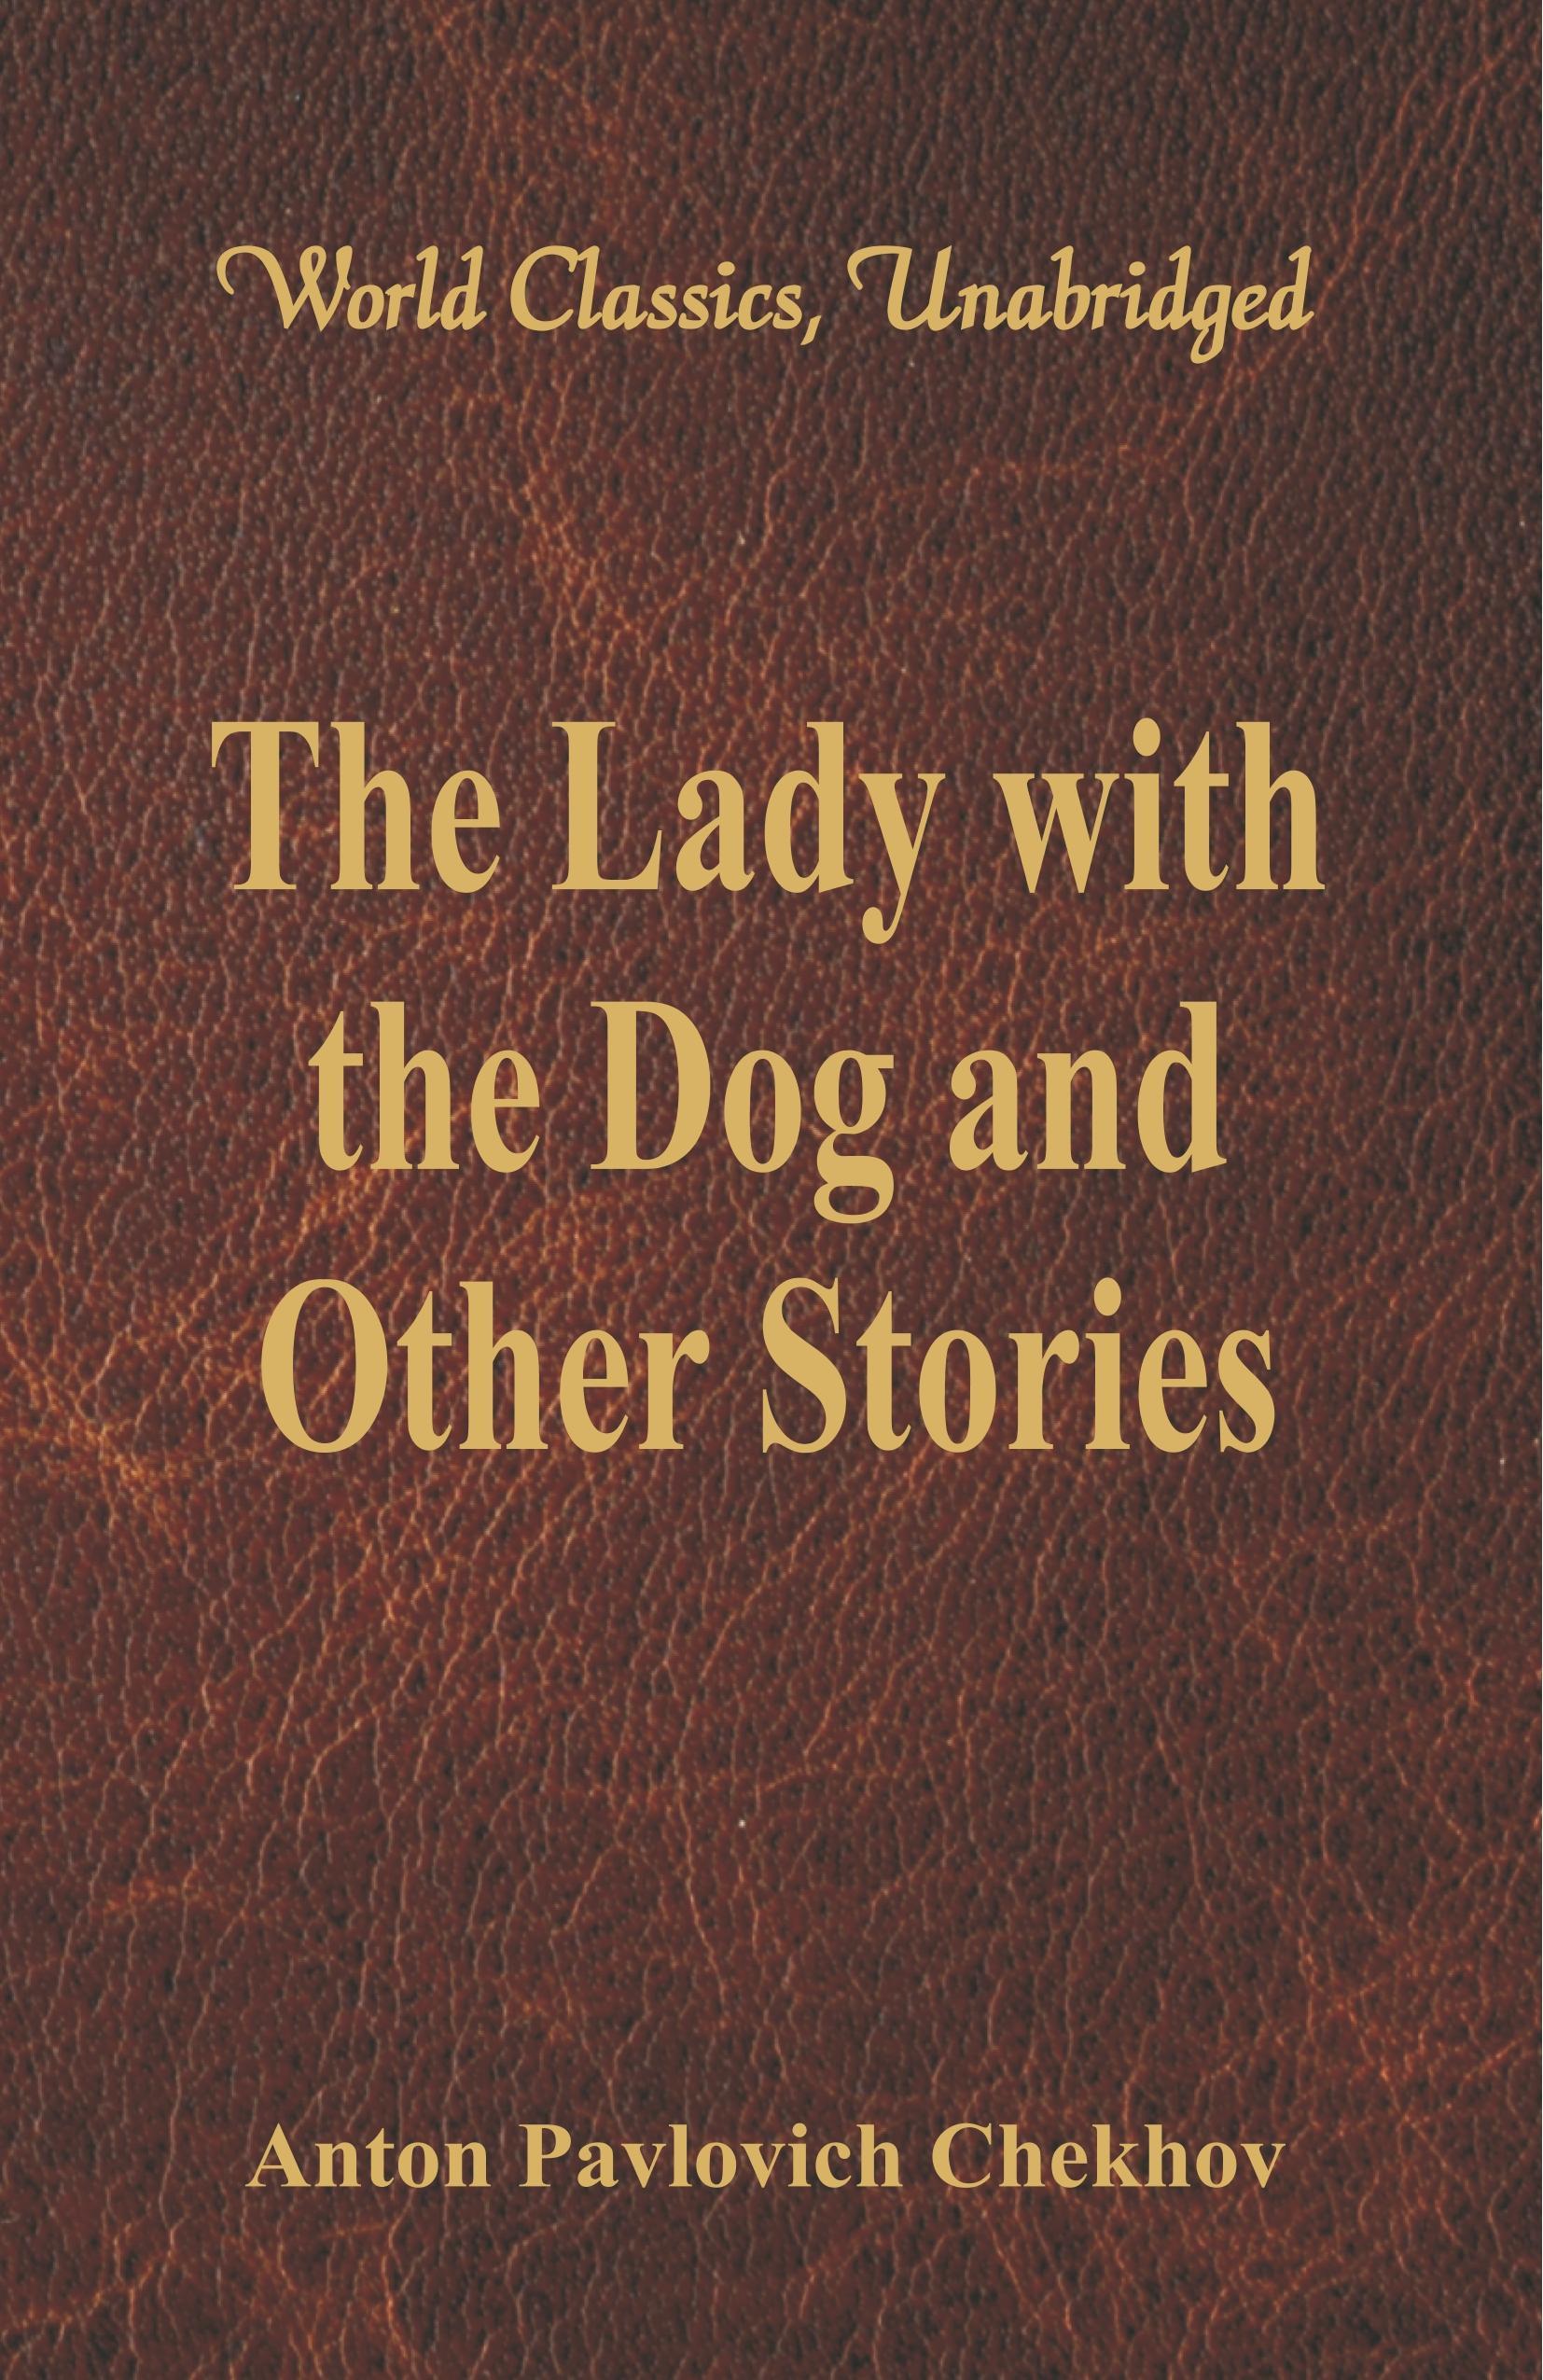 The Lady with the Dog and Other Stories (World Classics, Unabridged) - Chekhov, Anton Pavlovich